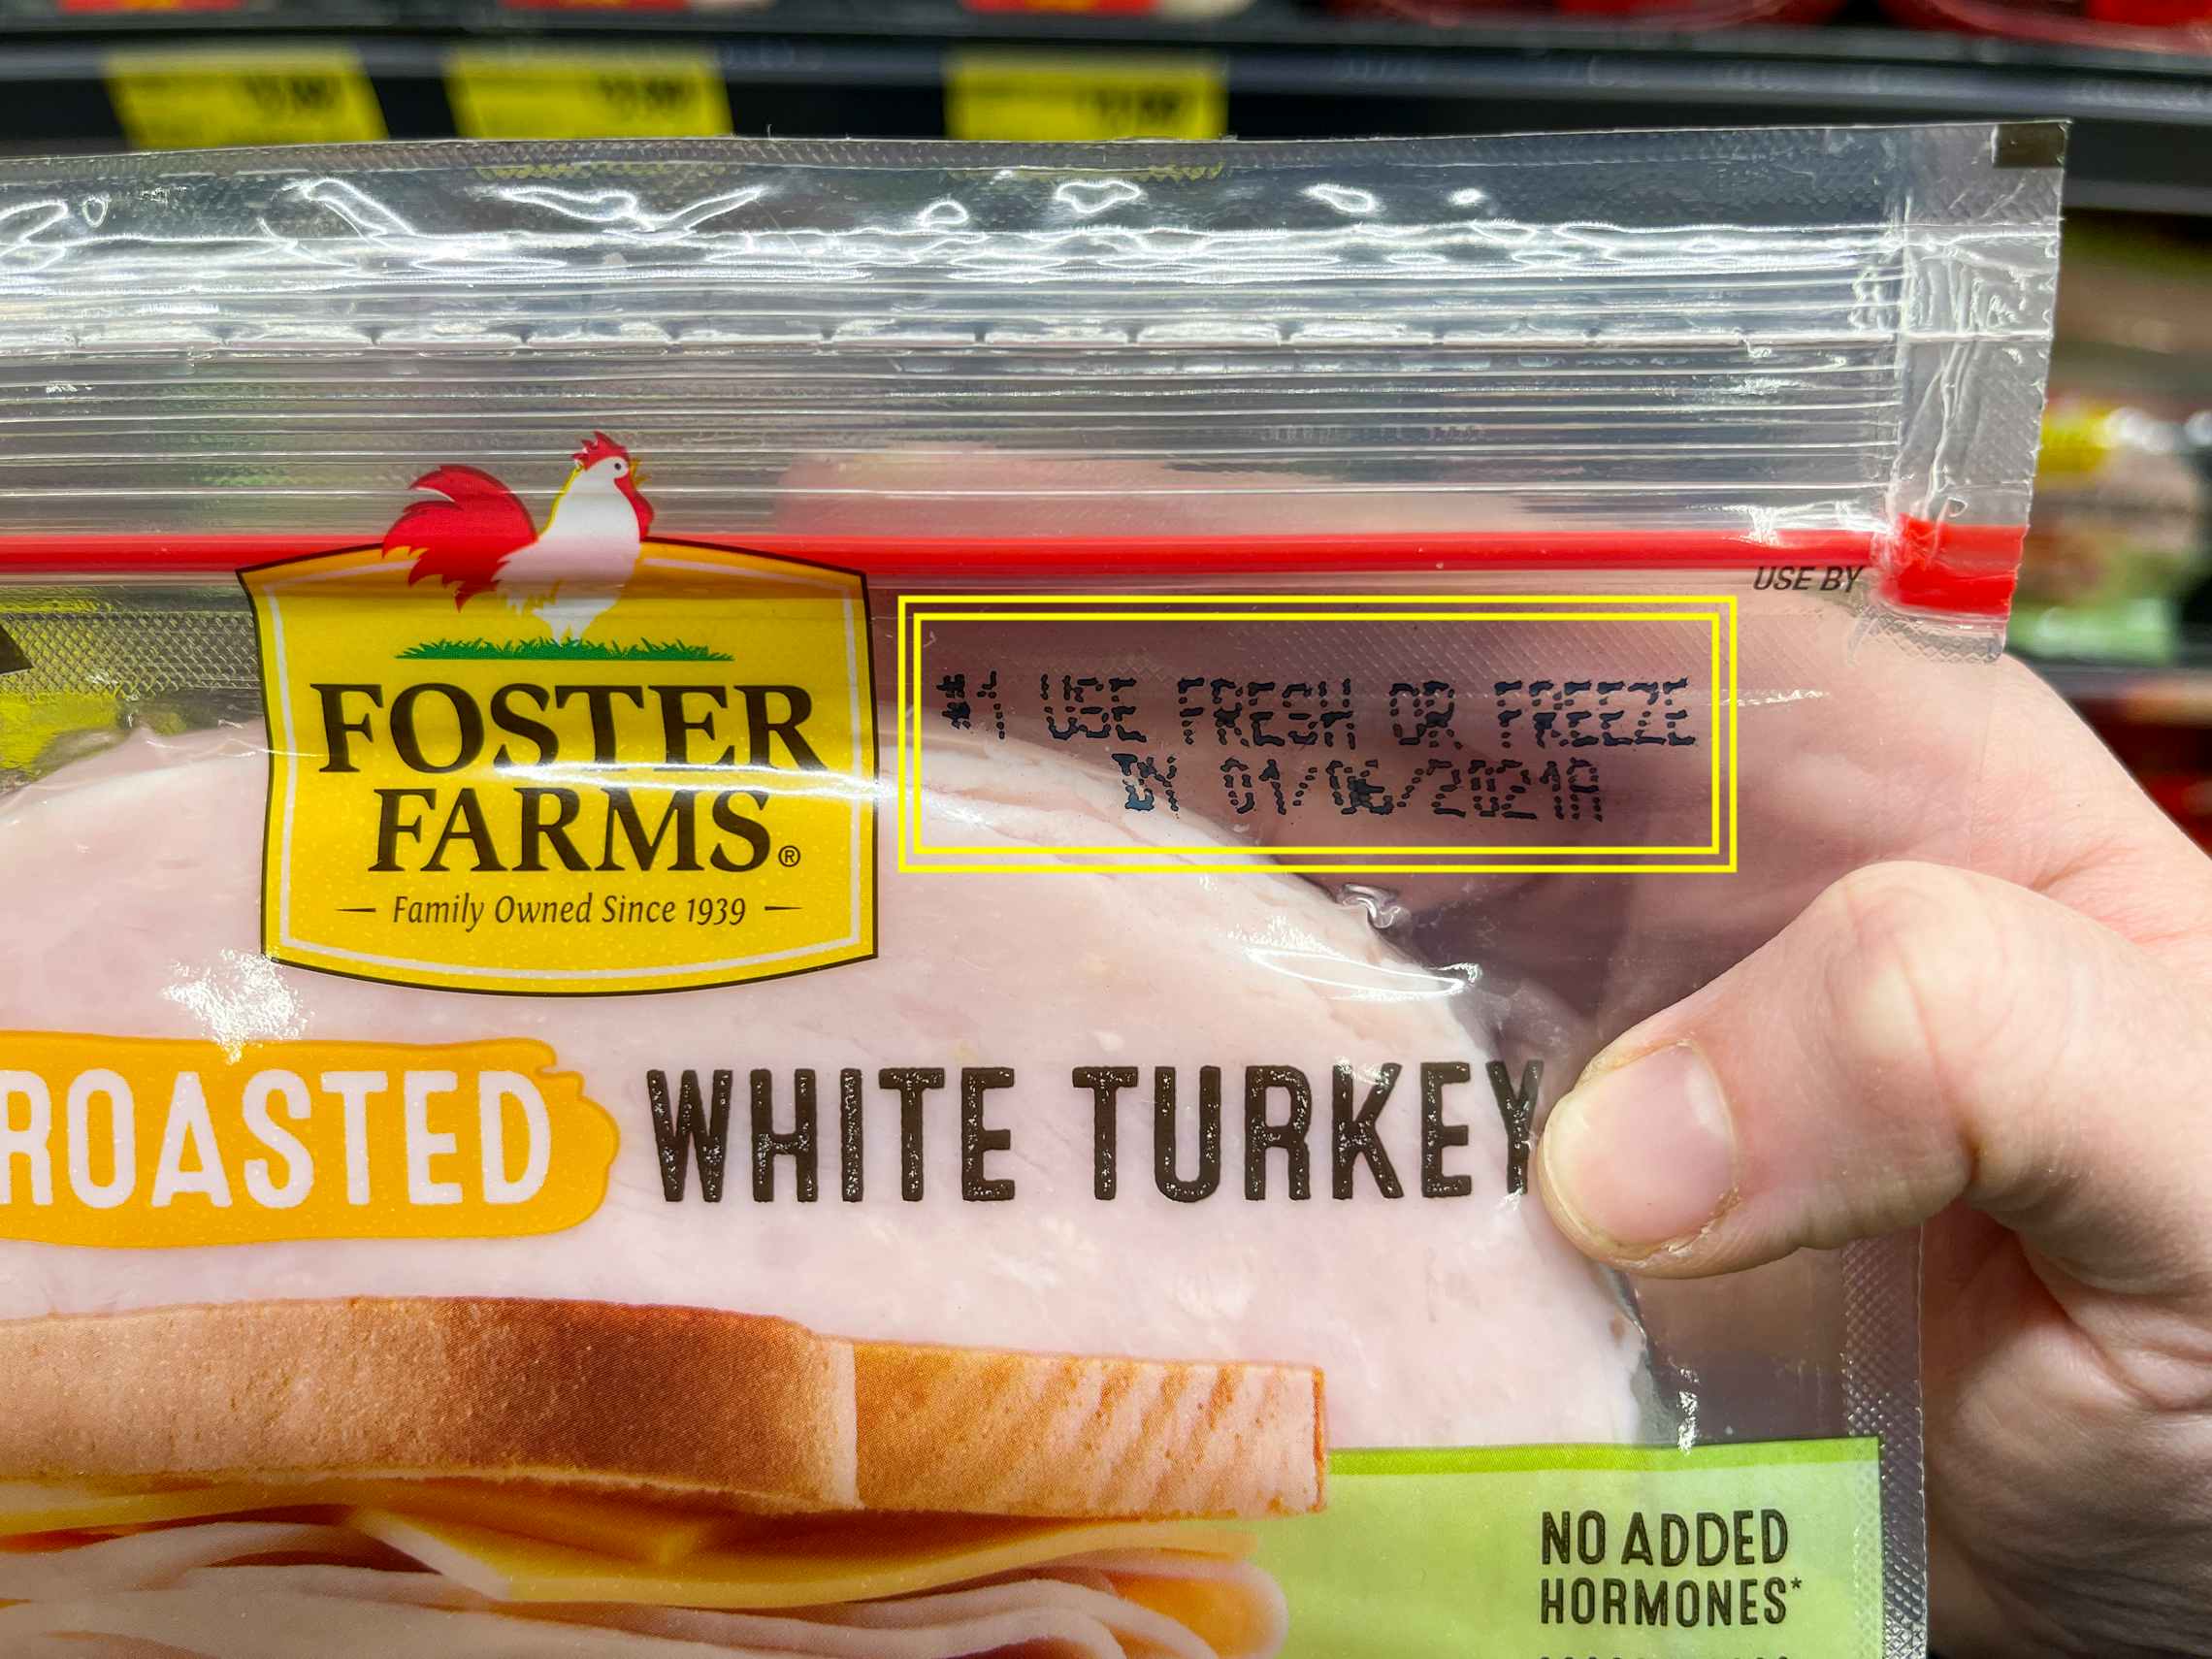 A pack of Foster Farms White Turkey sandwich meat with yellow squares around the expiration date.